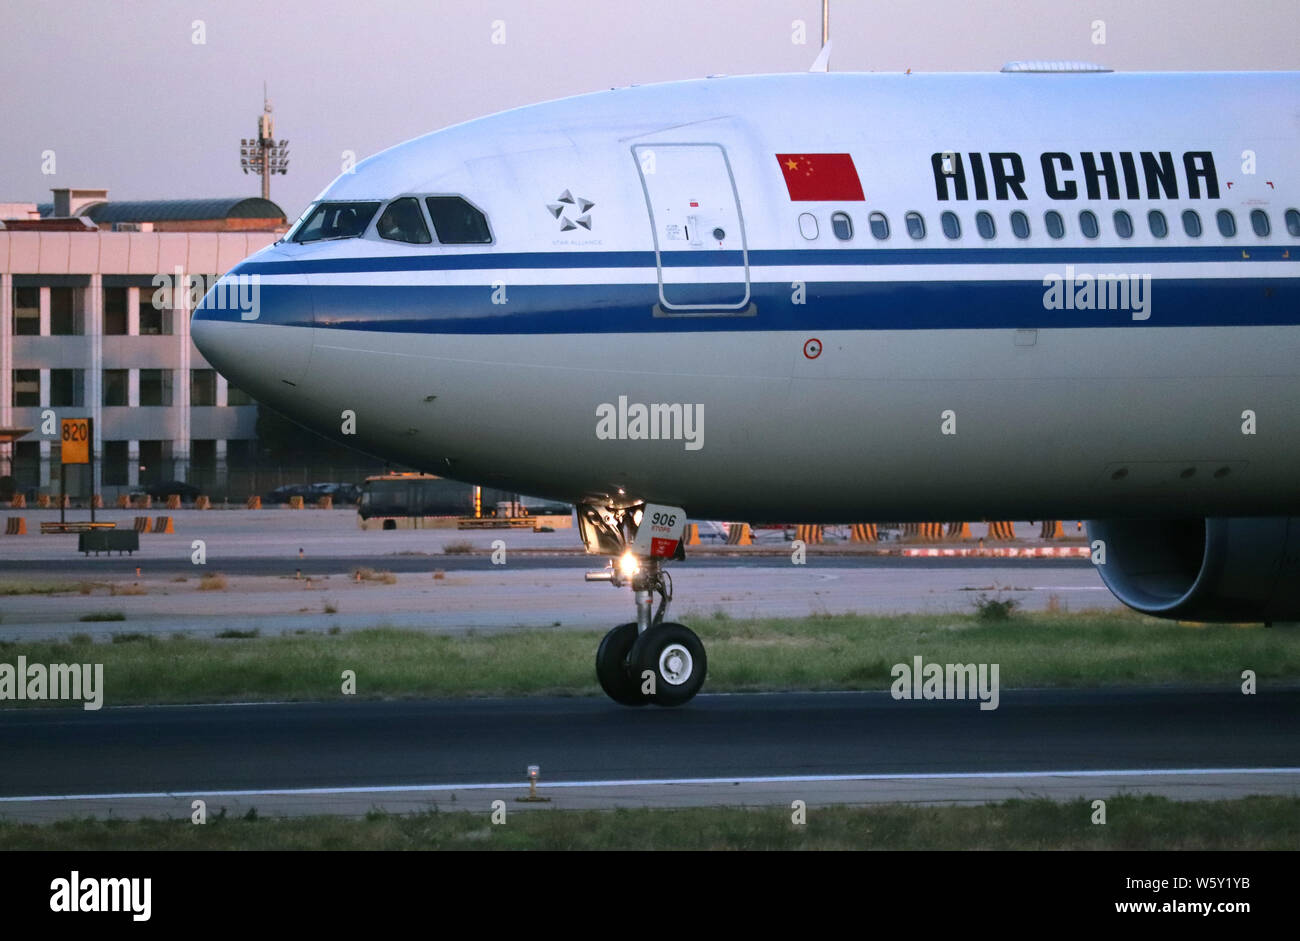 --FILE--An Airbus A330-300 jet plane of Air China taxis at the Beijing Capital International Airport in Beijing, China, 29 August 2018.   As the first Stock Photo